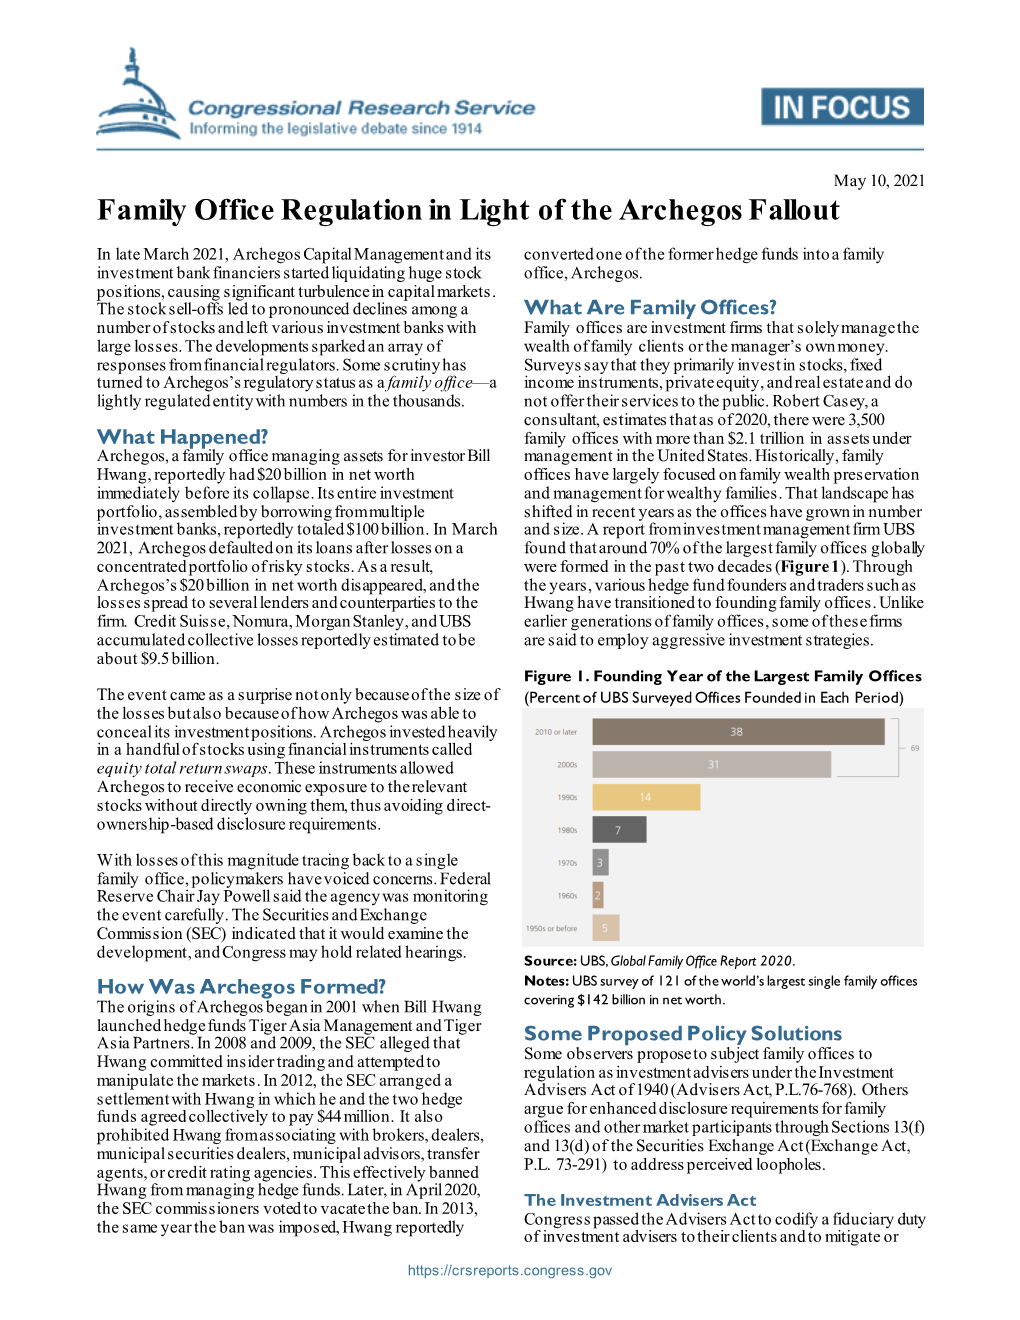 Family Office Regulation in Light of the Archegos Fallout